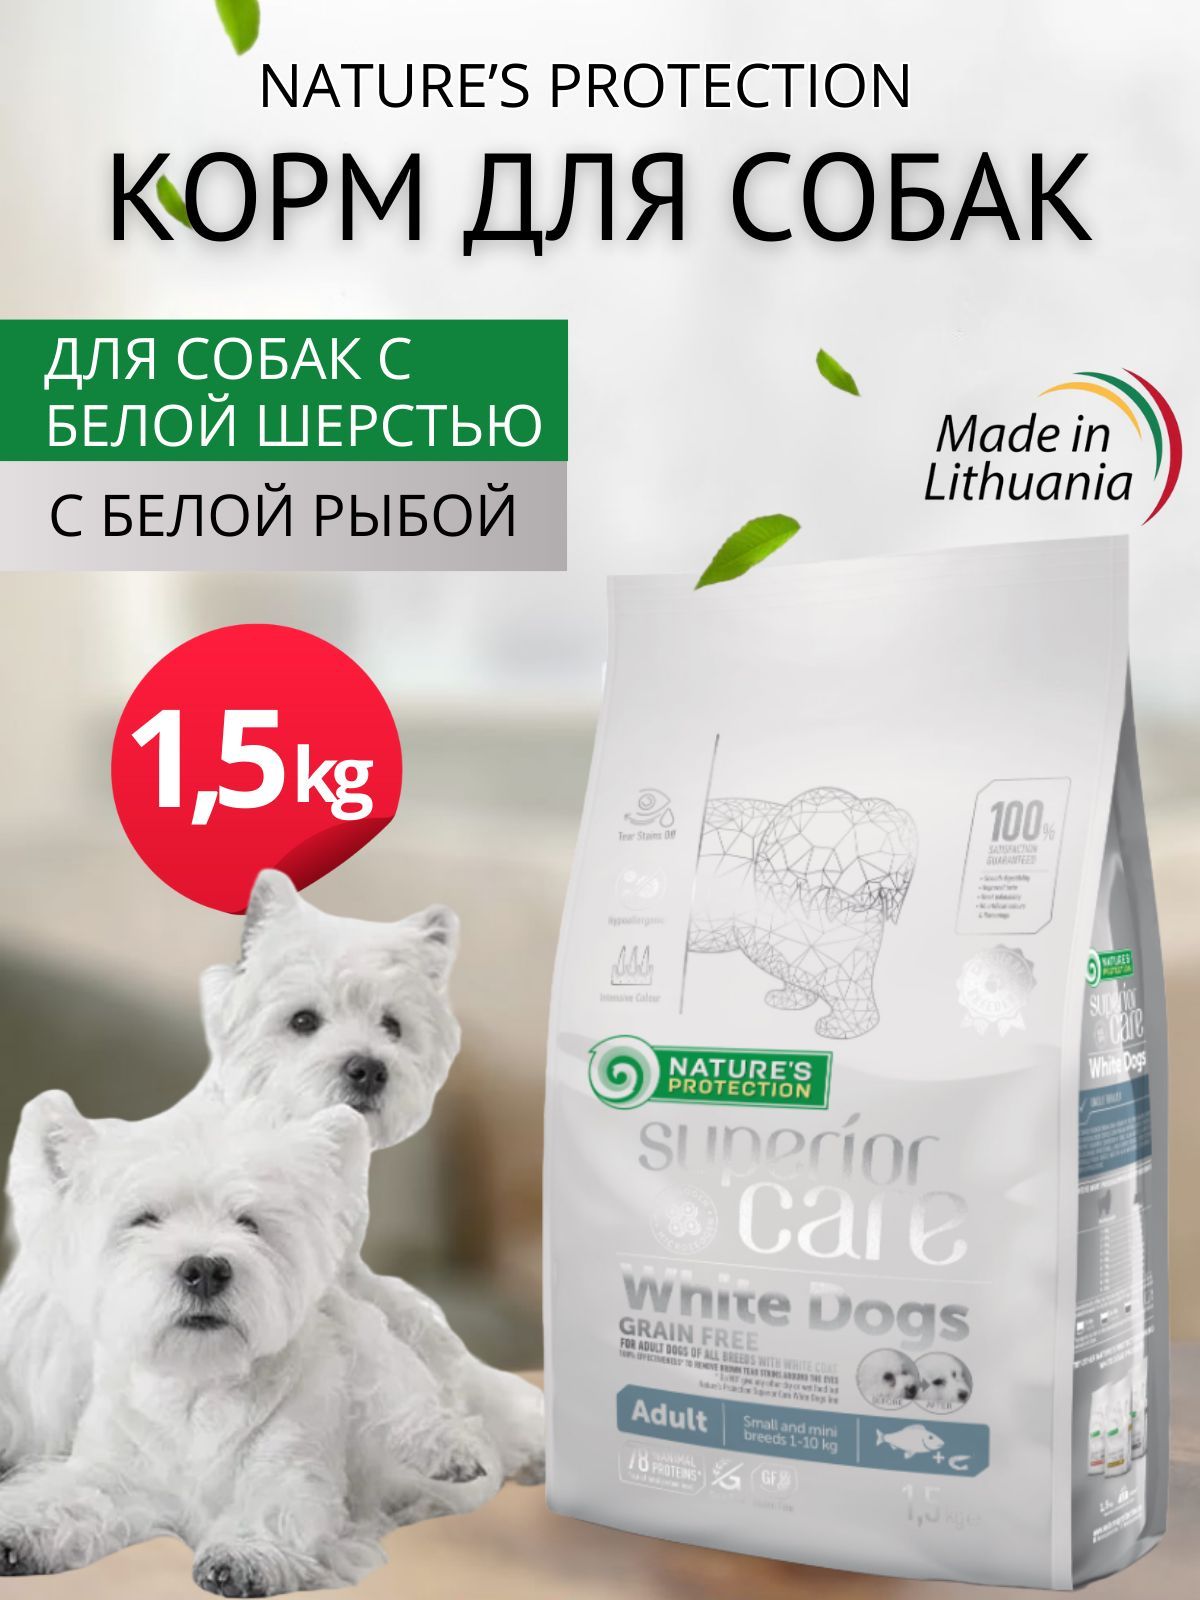 Natures protection white dogs